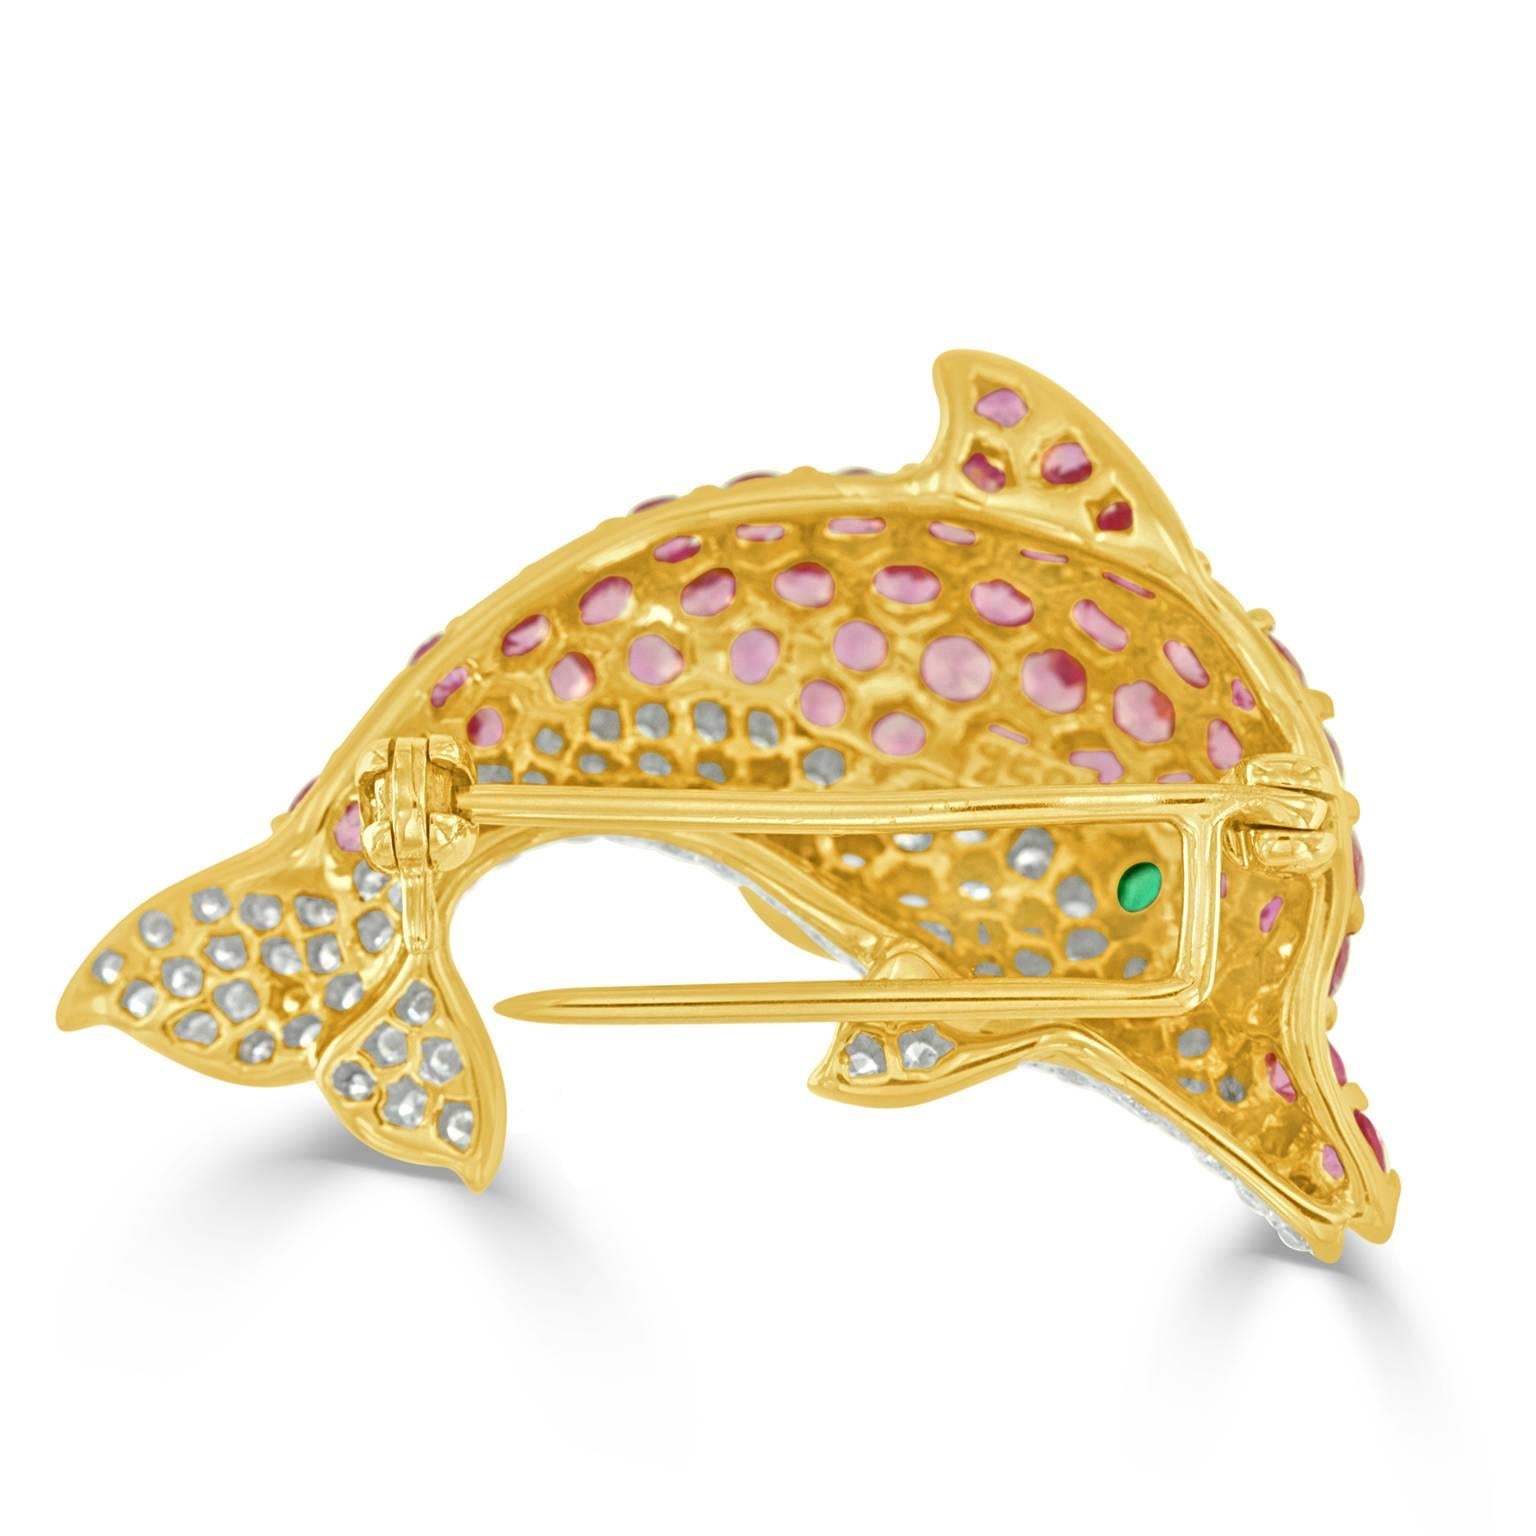 This charming dolphin brooch is set with 45- round cut pink sapphires weighing approximately 3.38 carats total, having excellent color and cut. Set with 101- round brilliant cut diamonds weighing approximately 0.81 carats total, having VS clarity